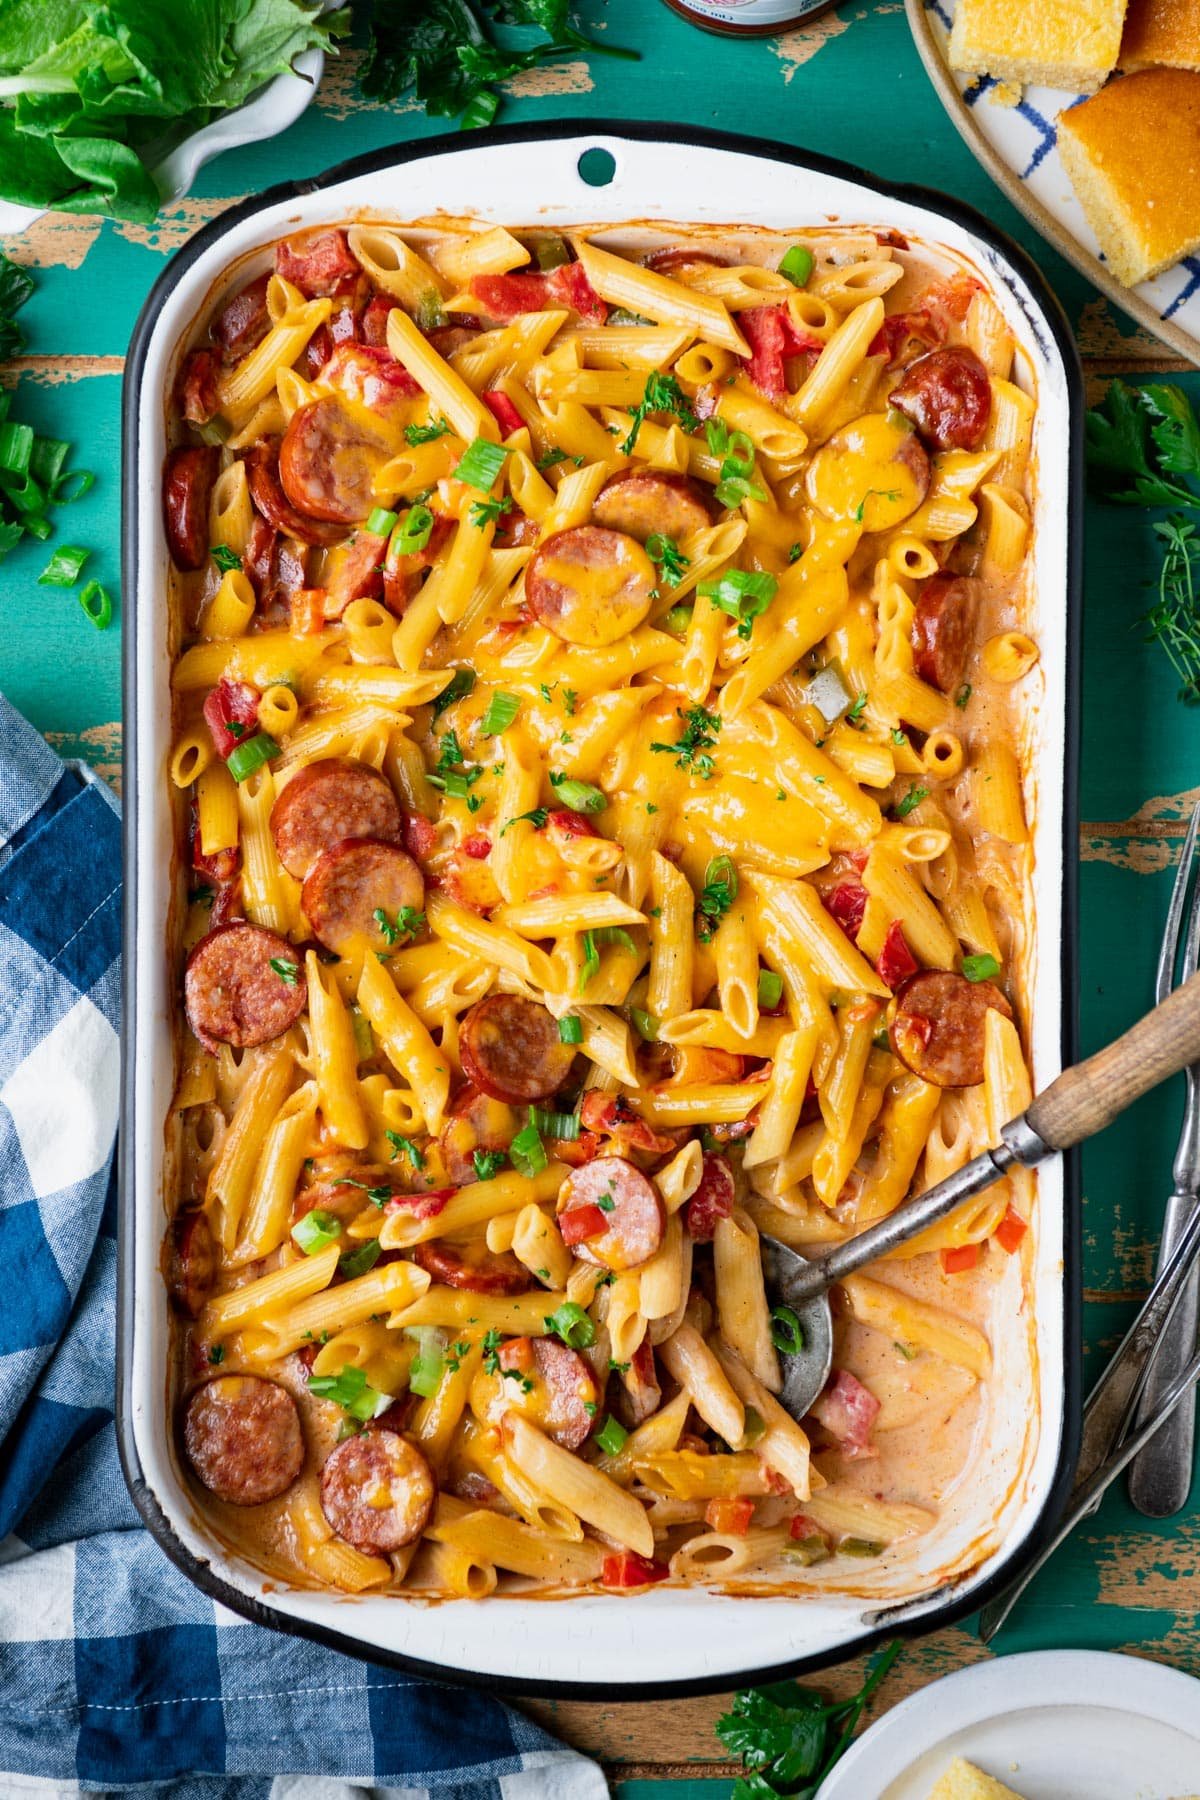 Overhead shot of a pan of cajun pasta with sausage and peppers in a casserole dish.